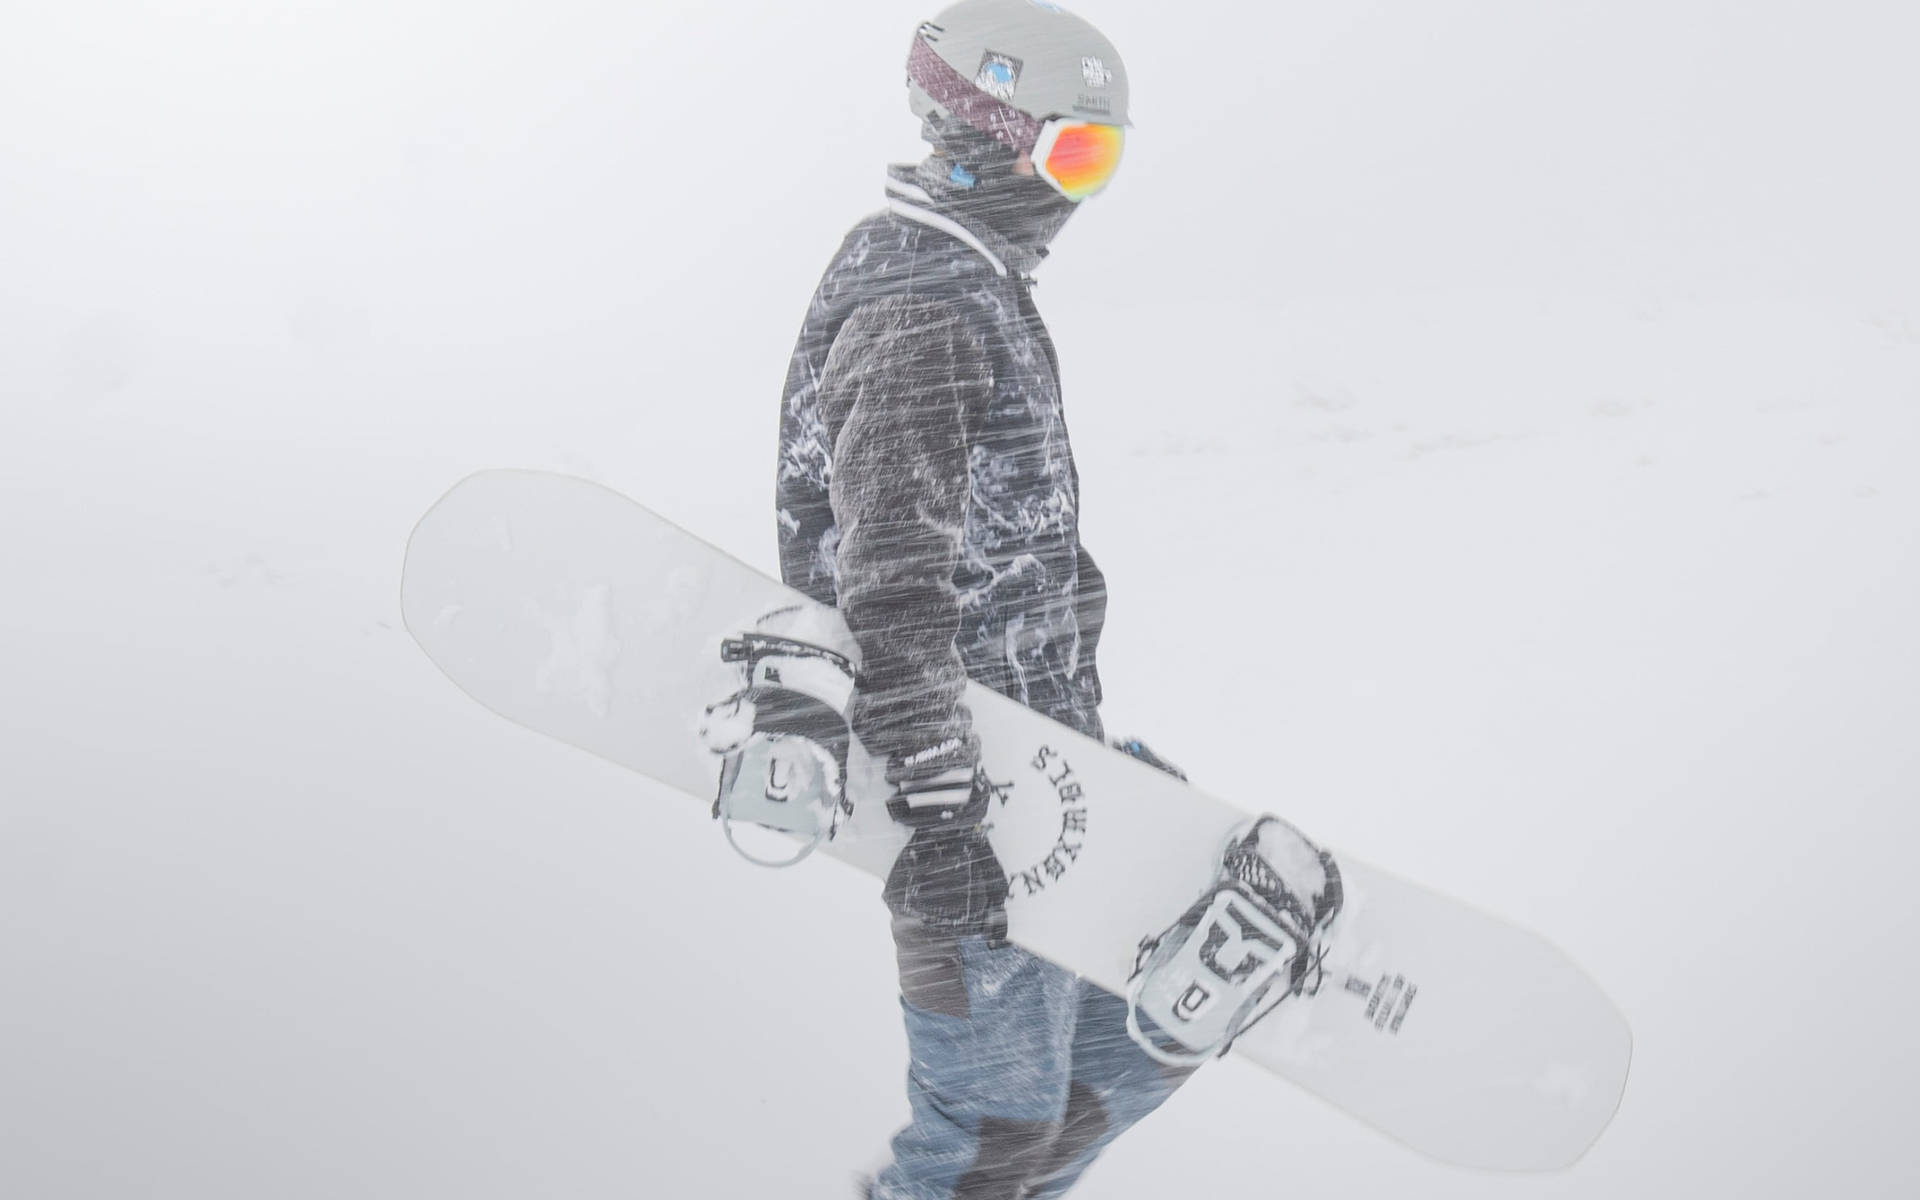 Mysterious Snowboarding Person Background